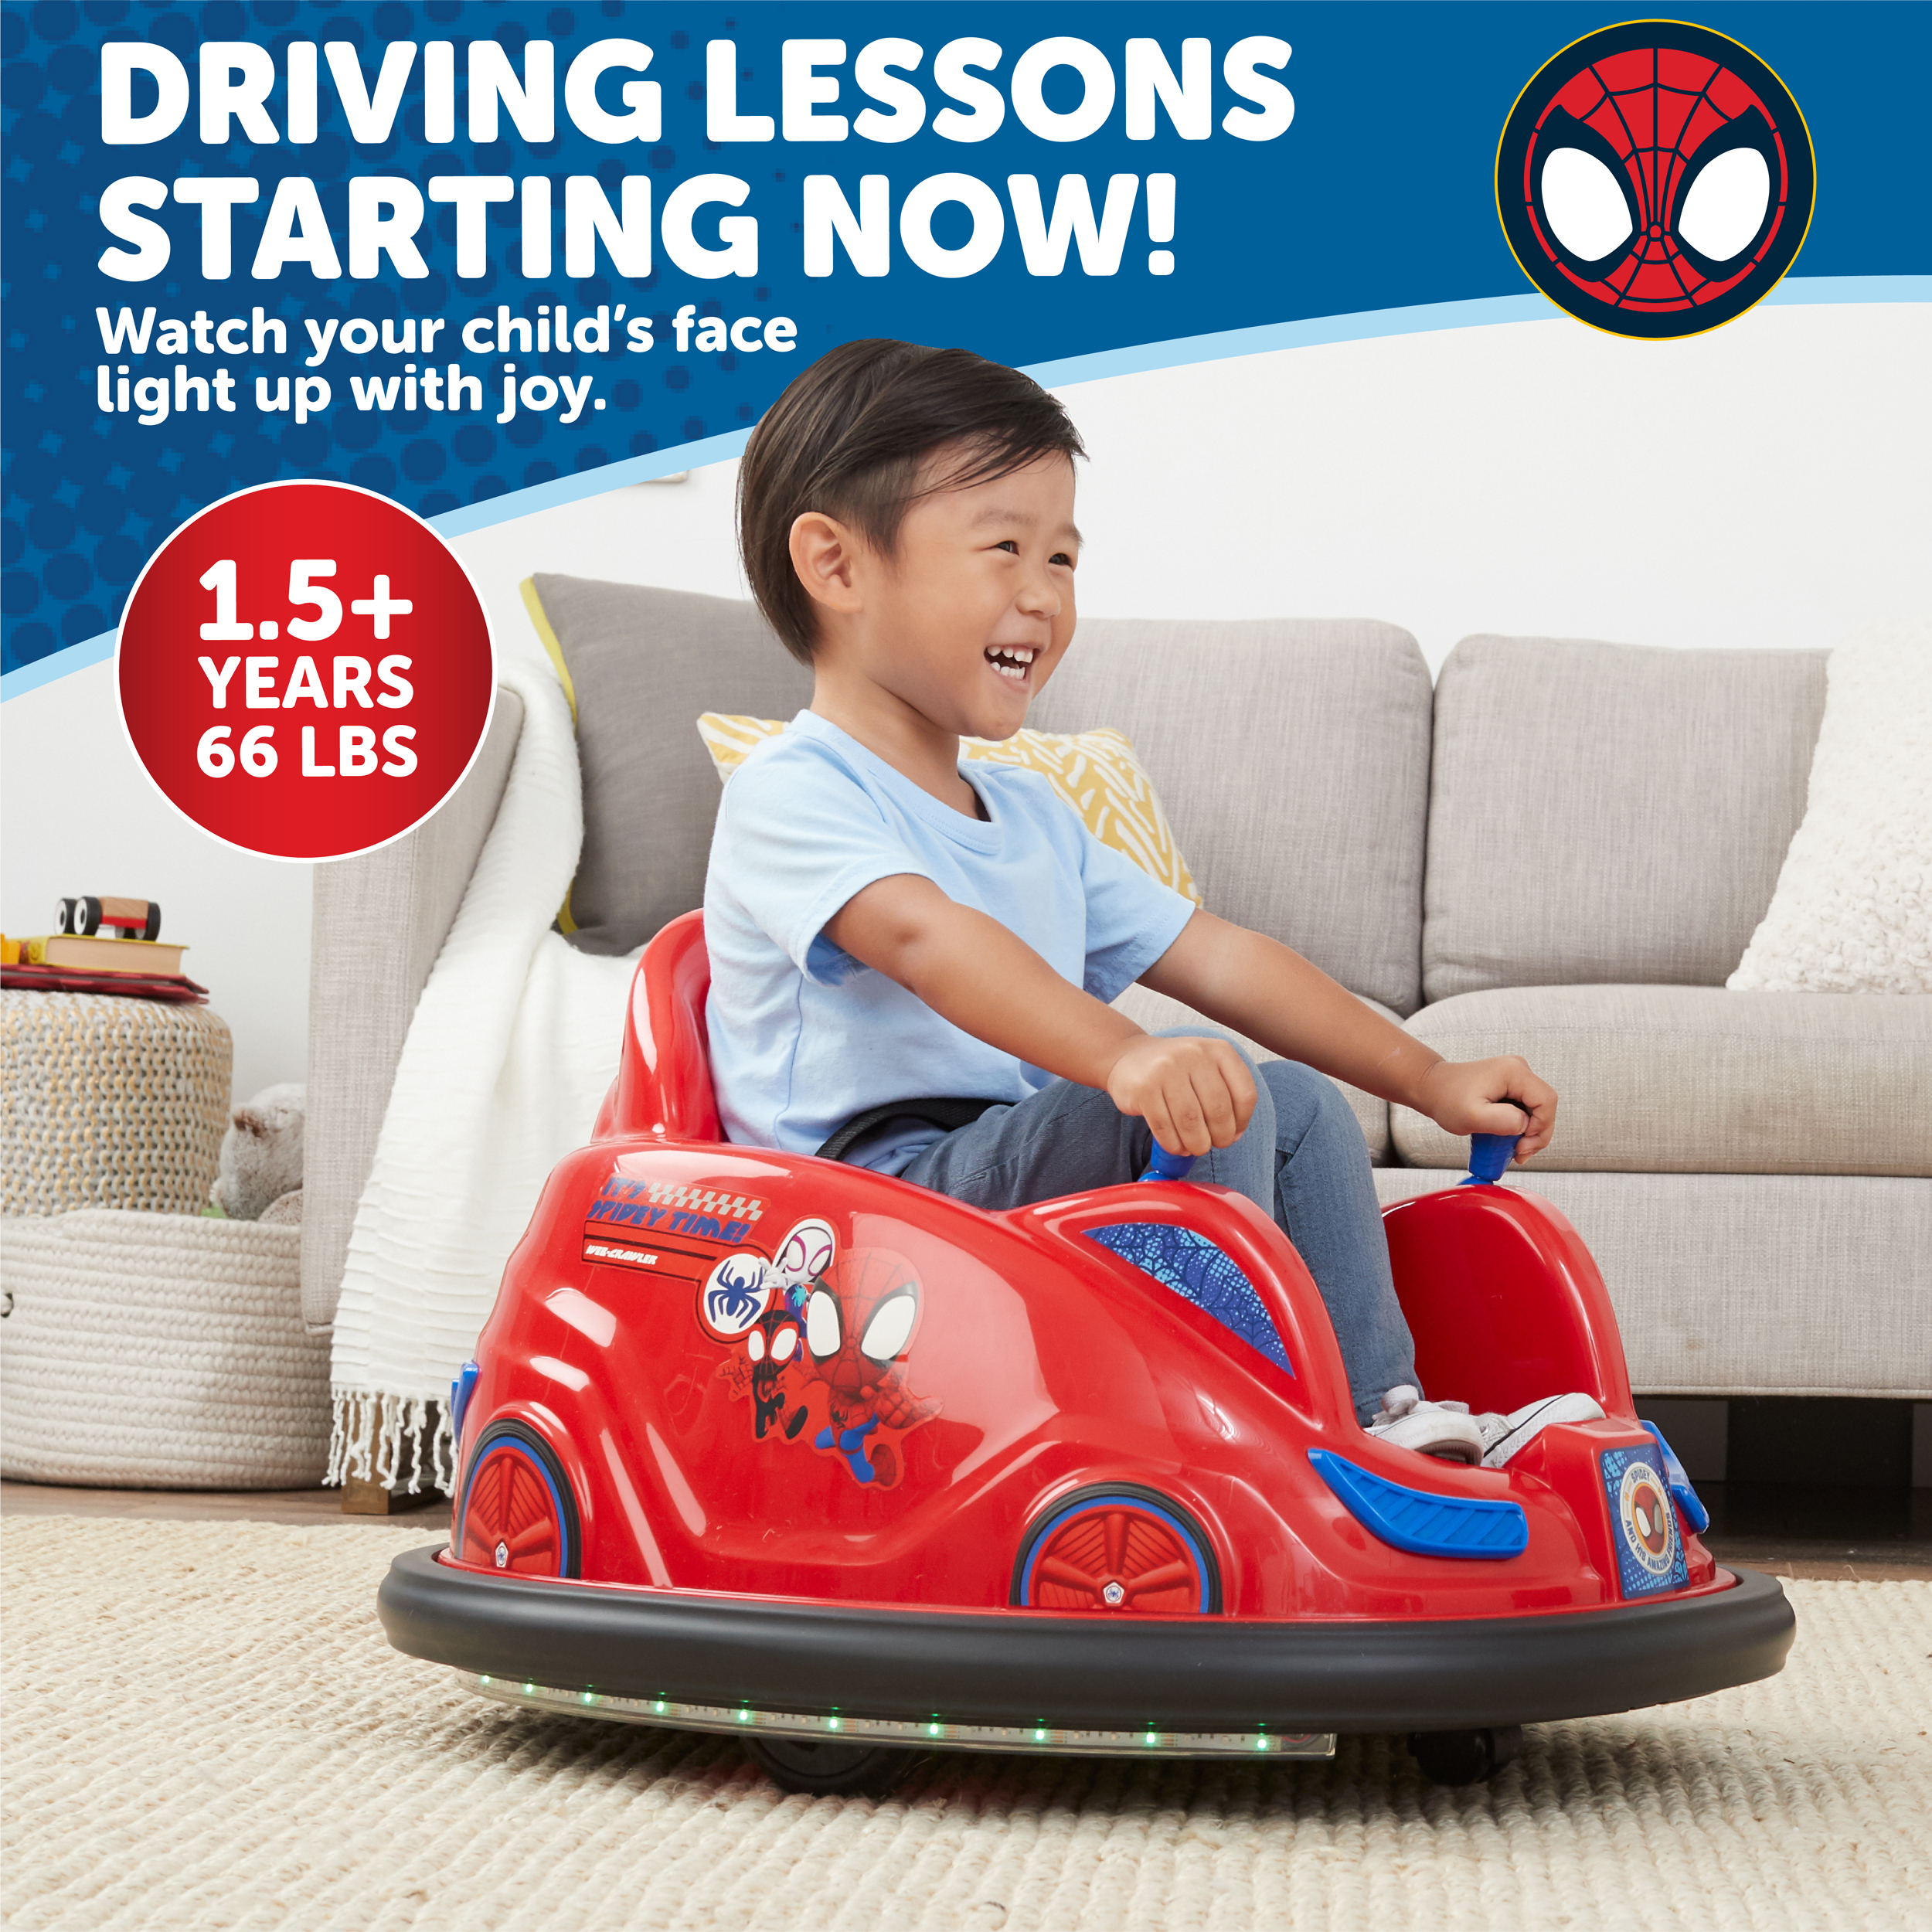 Spidey and His Amazing Friends, 6 Volts Bumper Car, Battery Powered Ride on, Fun LED Lights Includes, Charger, Ages 1.5- 4 Years, Unisex - image 4 of 14